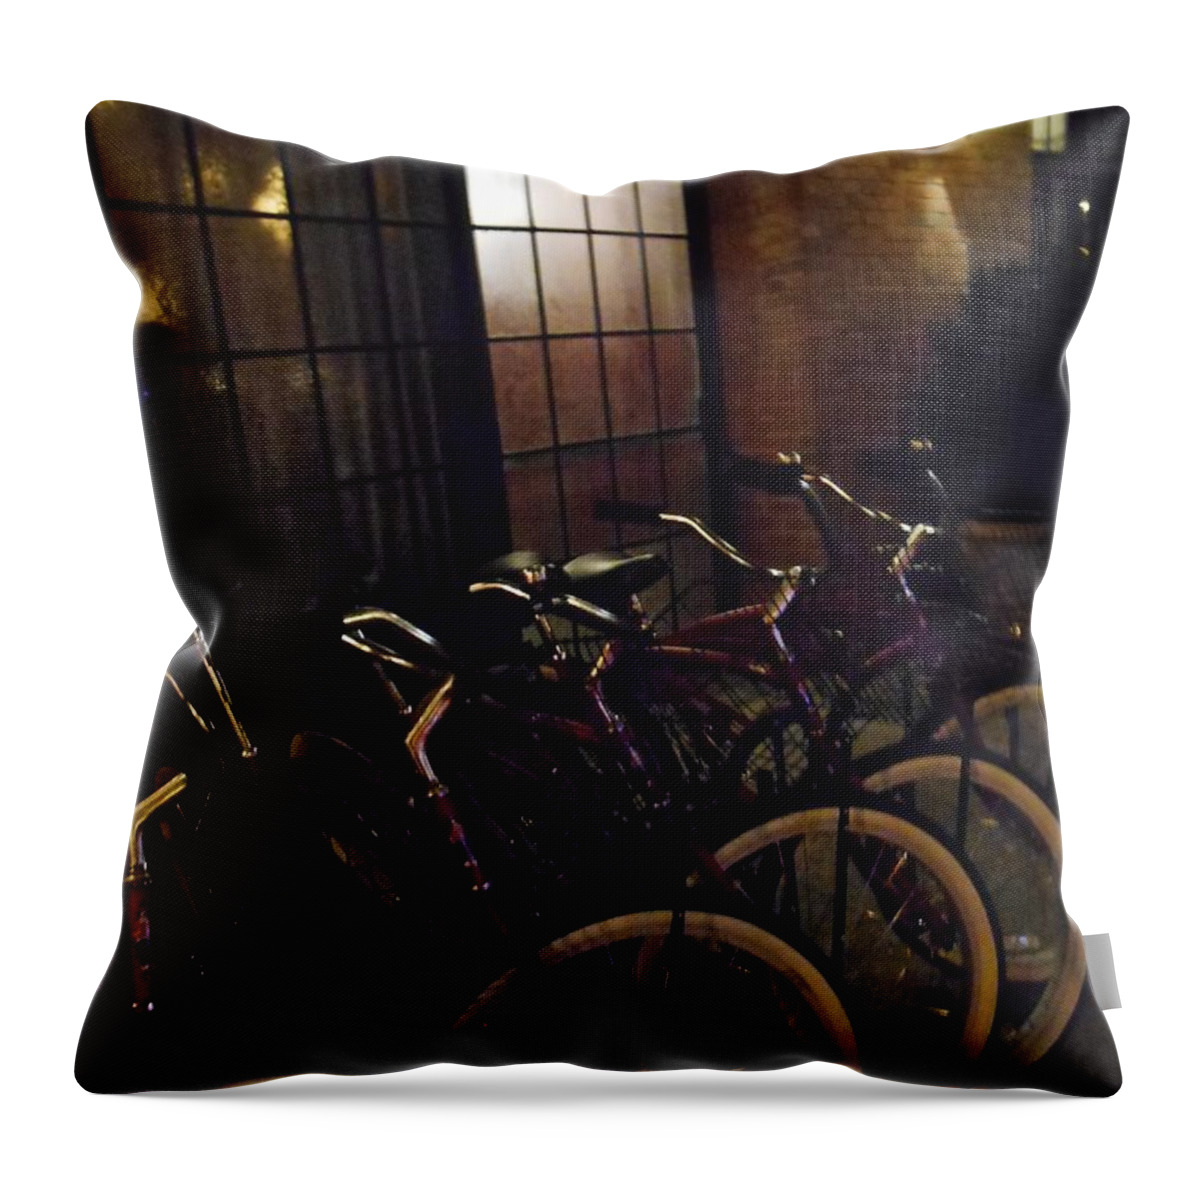 Bikes Throw Pillow featuring the photograph Bowery Bikes by Joan Reese